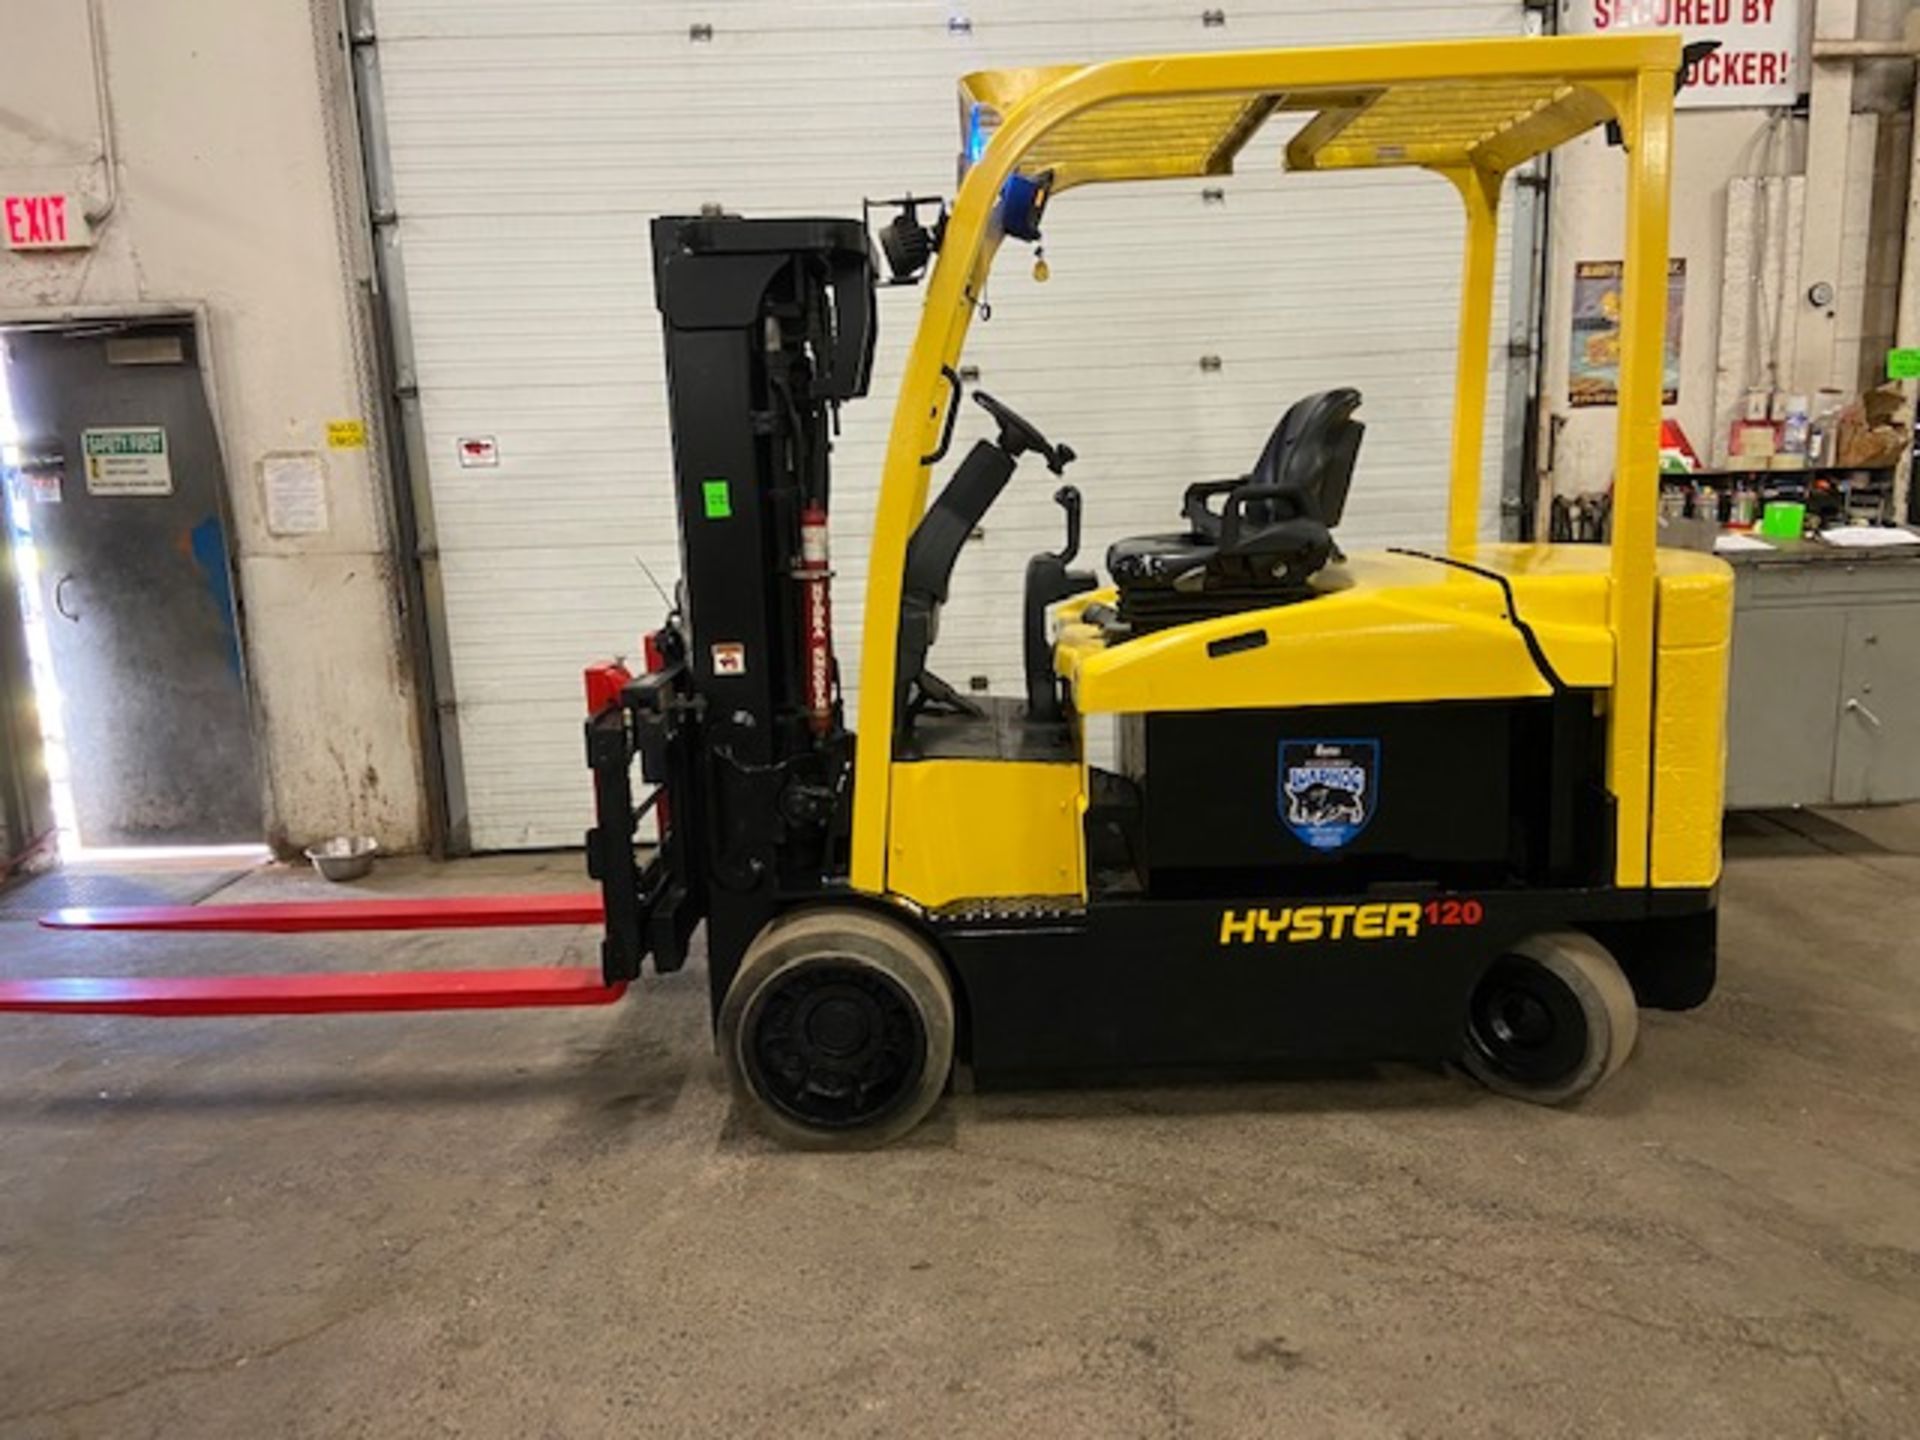 FREE CUSTOMS - 2014 Hyster 12000lbs Capacity Forklift Electric with sideshift and 3 stage mast & 72"